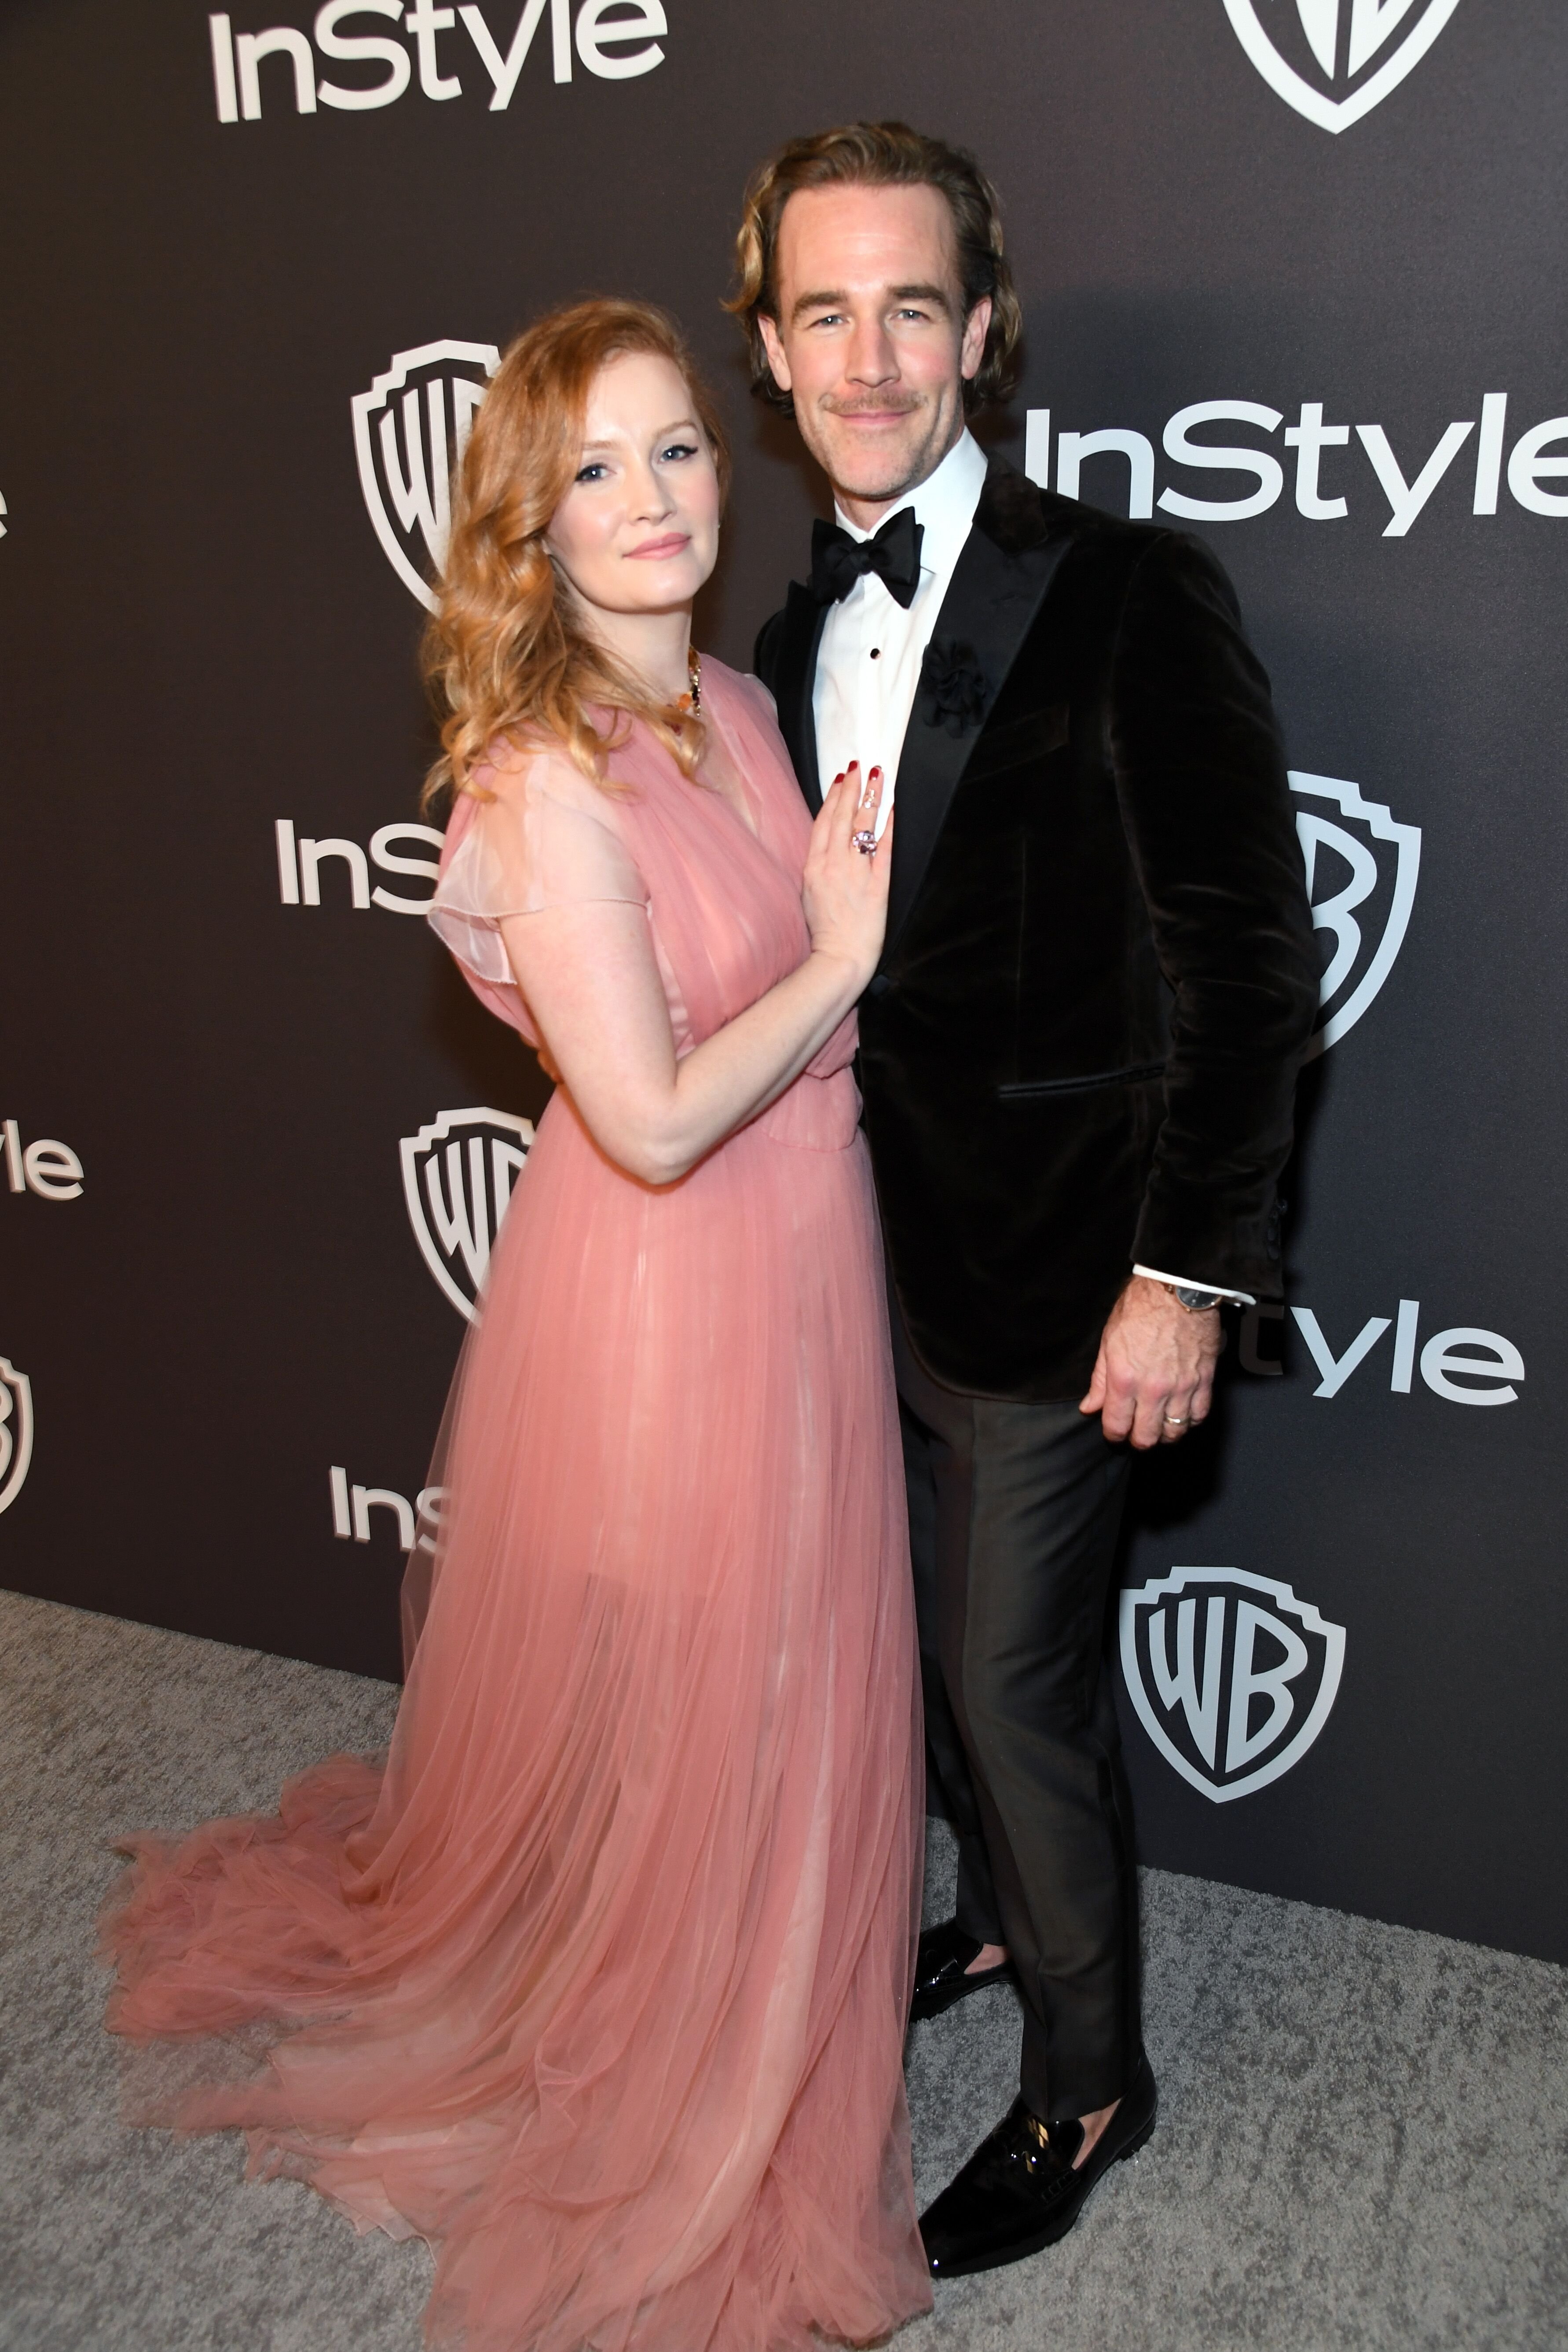 Kimberly Brook (L) and James Van Der Beek attend the 2019 InStyle and Warner Bros. 76th Annual Golden Globe Awards Post-Party at The Beverly Hilton Hotel on January 6, 2019 in Beverly Hills, California | Photo: Getty Images